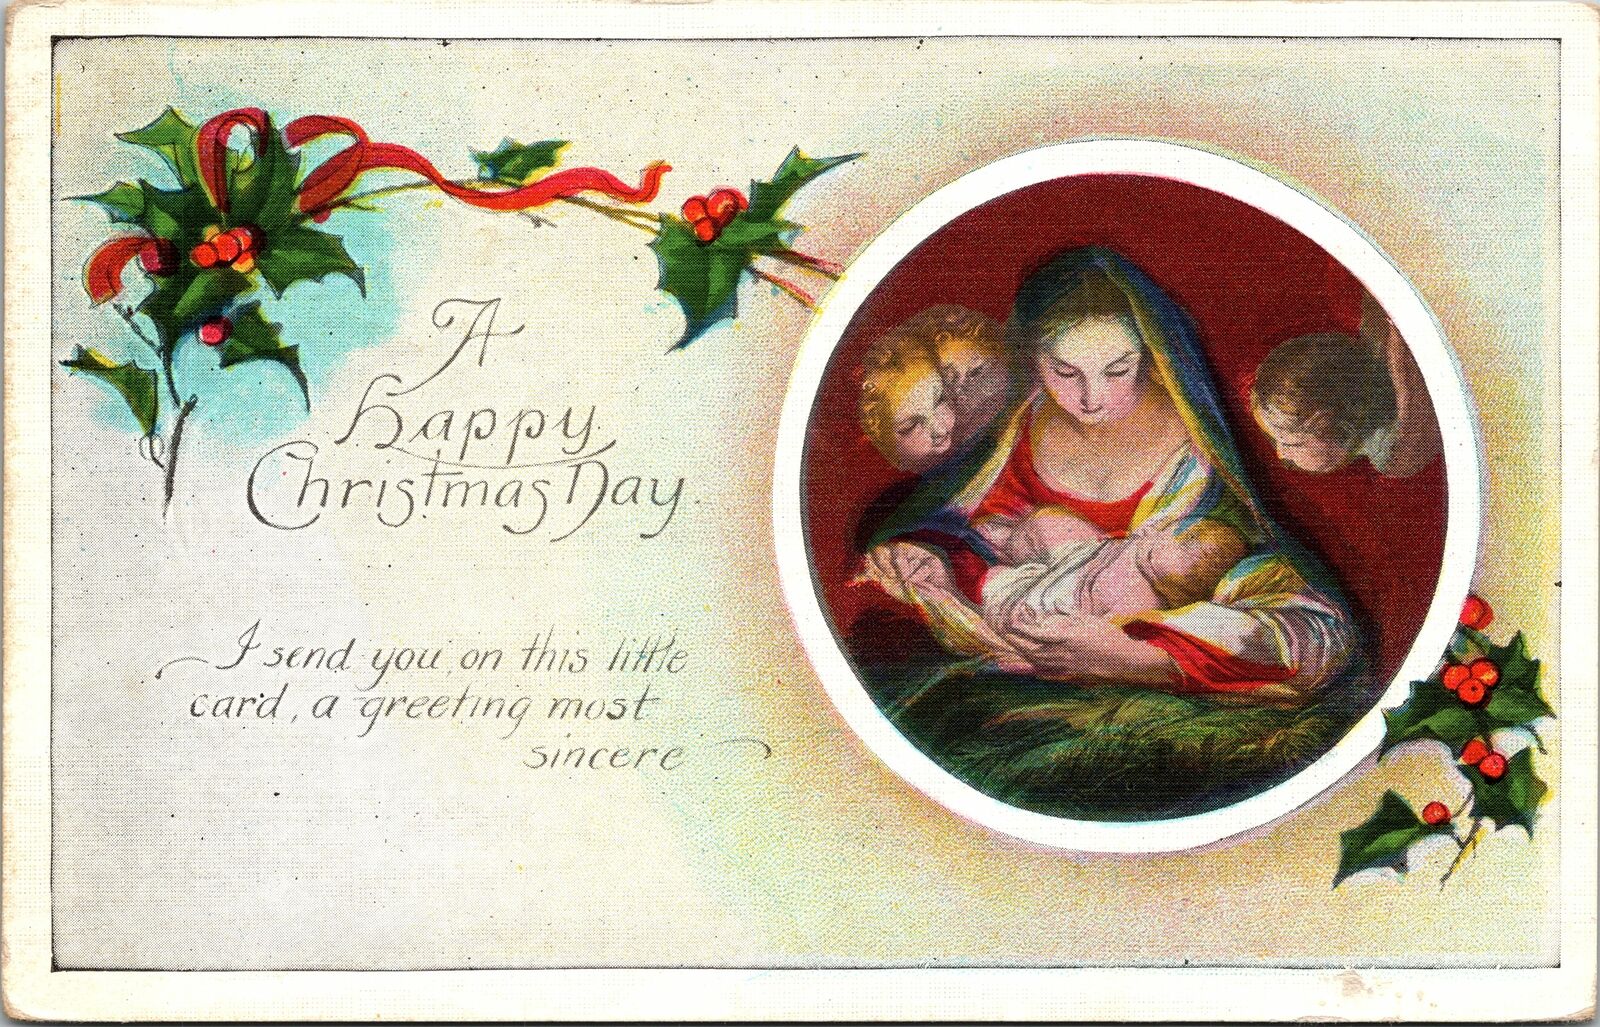 VINTAGE POSTCARD A HAPPY CHRISTMAS DAY MAILED VERGEENES VERMONT 1921